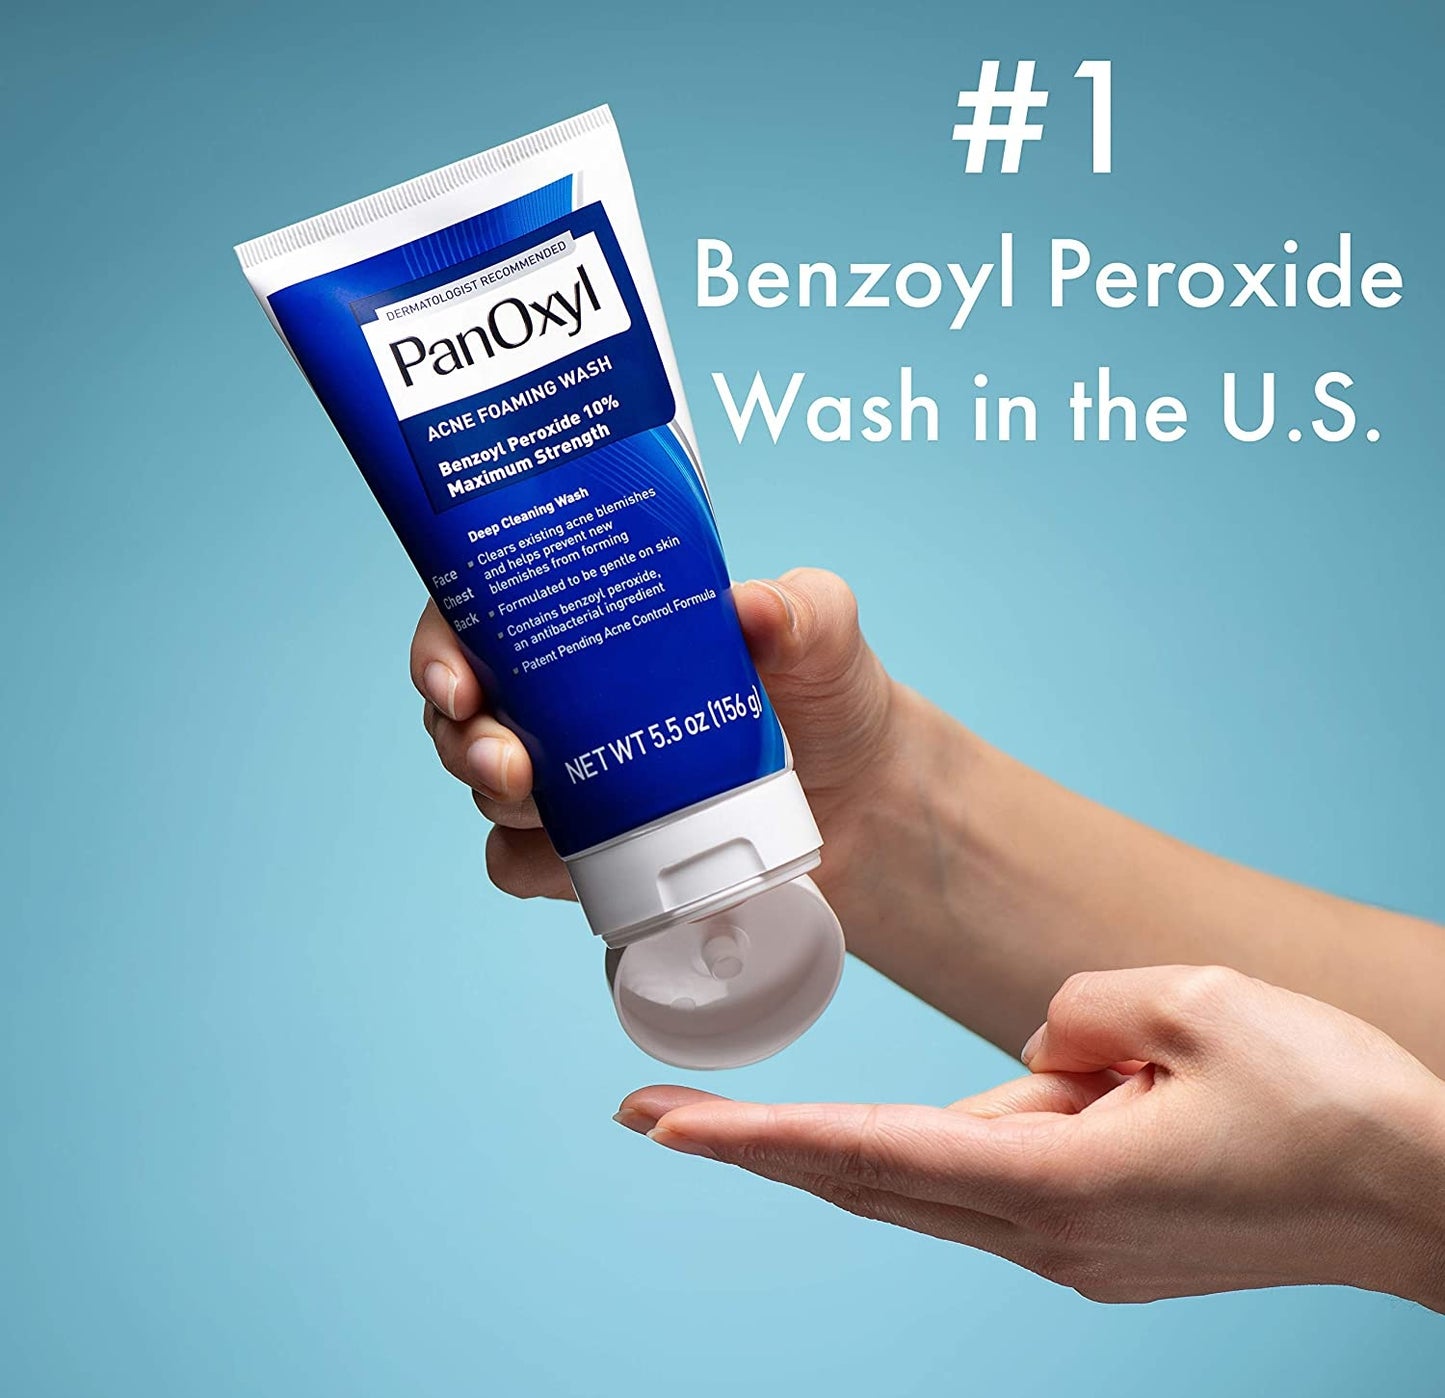 PanOxyl® Acne Foaming Wash with Benzoyl Peroxide 10% Maximum Strength - 156g